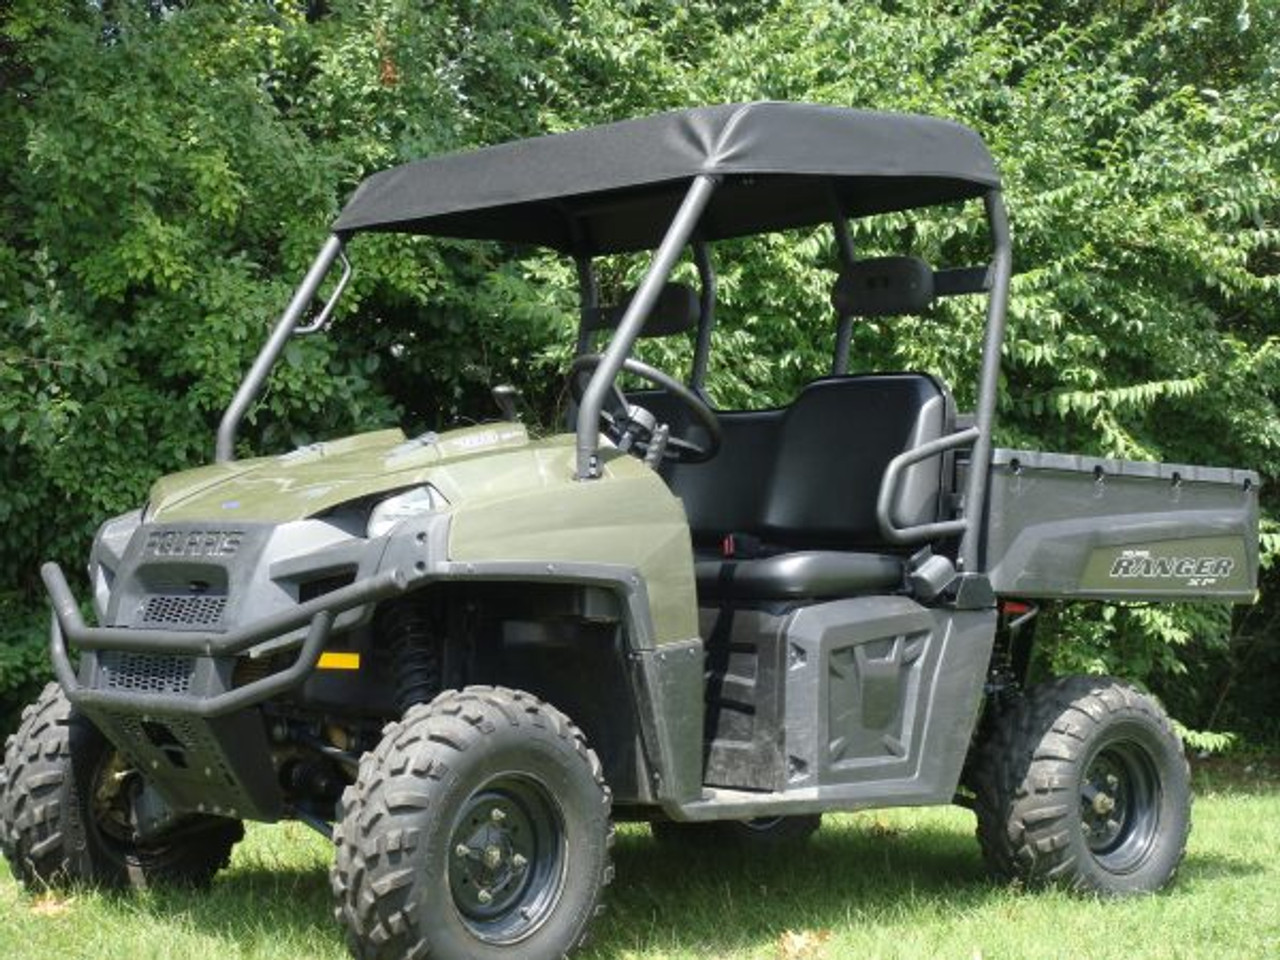 3 Star side x side Polaris Ranger 500/700/800/6x6 soft top side and front angle view